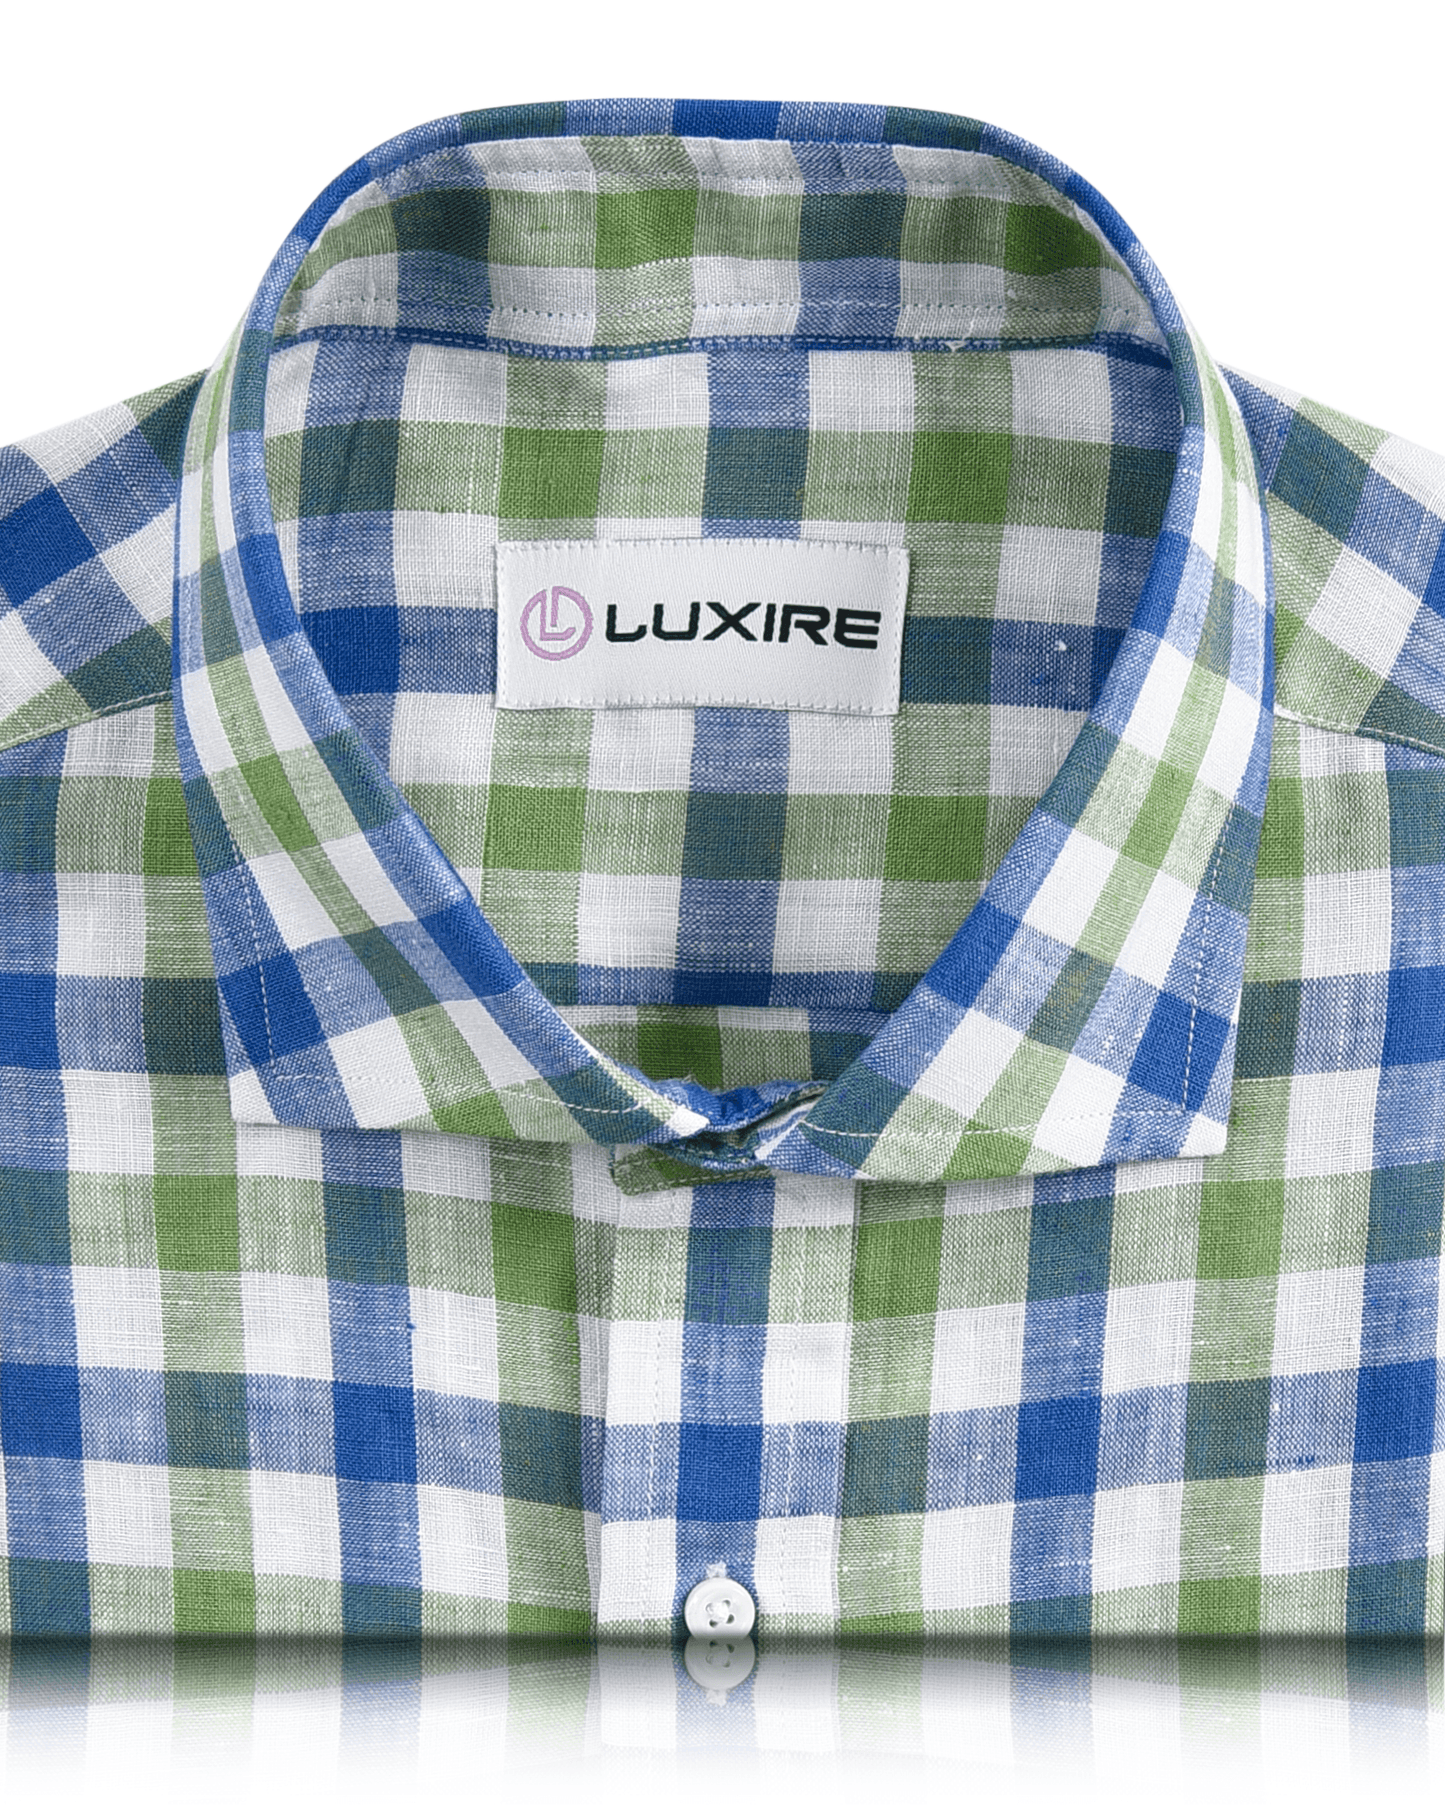 Front close up view of custom linen shirt for men by Luxire in green and blue gingham